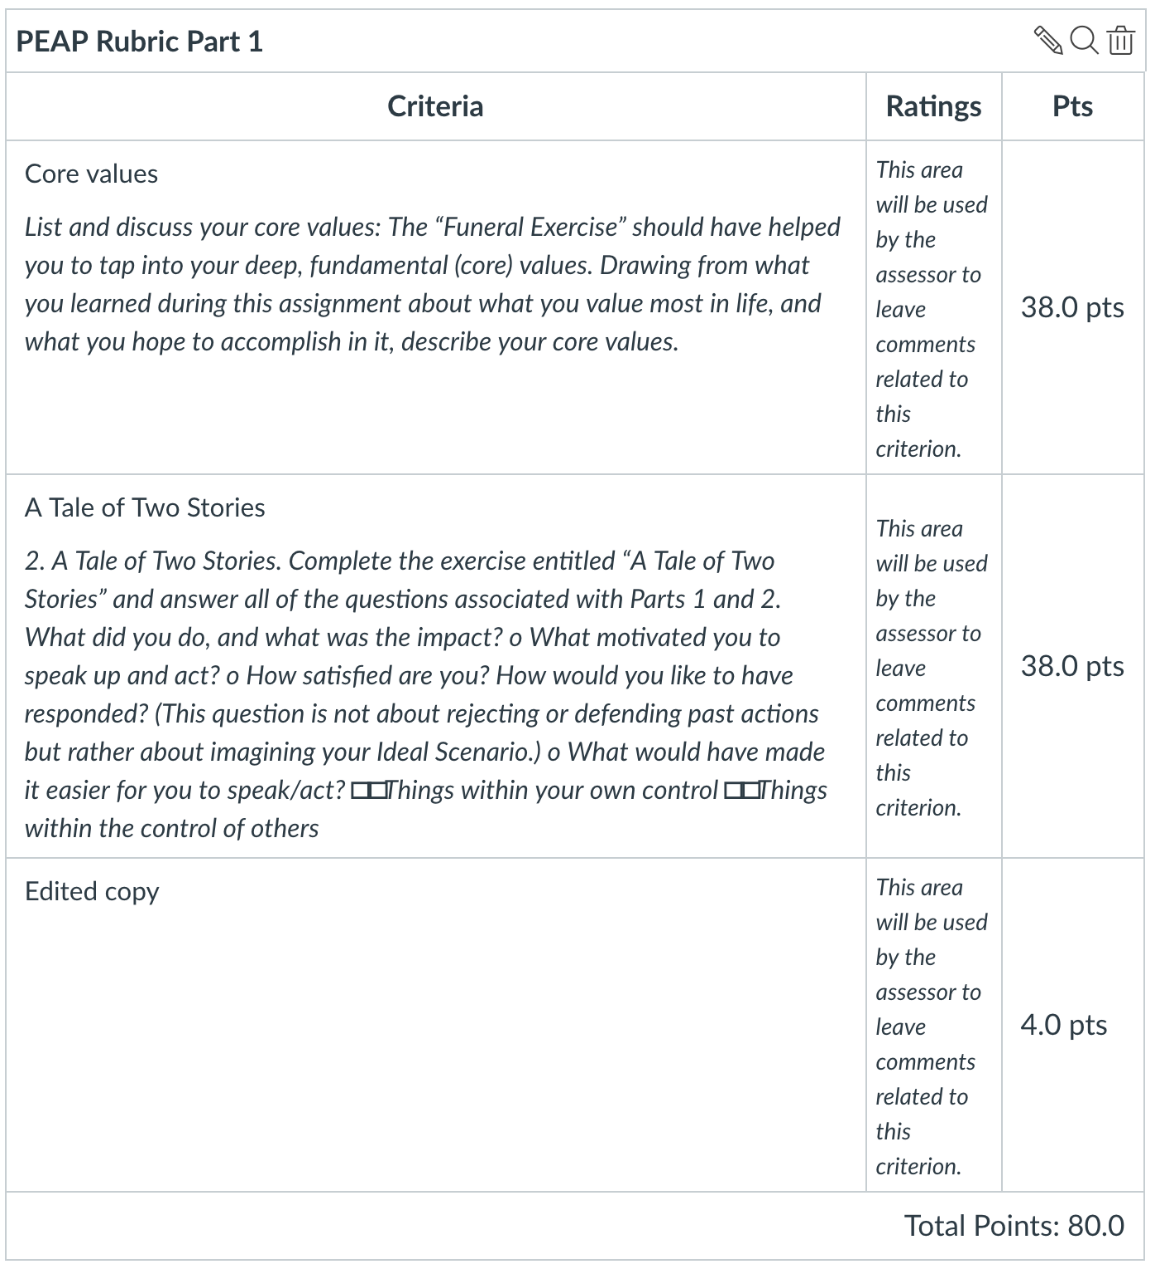 Example of the class rubric. includes the criteria for core values, a tale of two stories exercise, and the edited copy. Next column describes the ratings for each critera/exercise. The last column has the point value for each of the exercises (38 points, 38 points, 4 points).